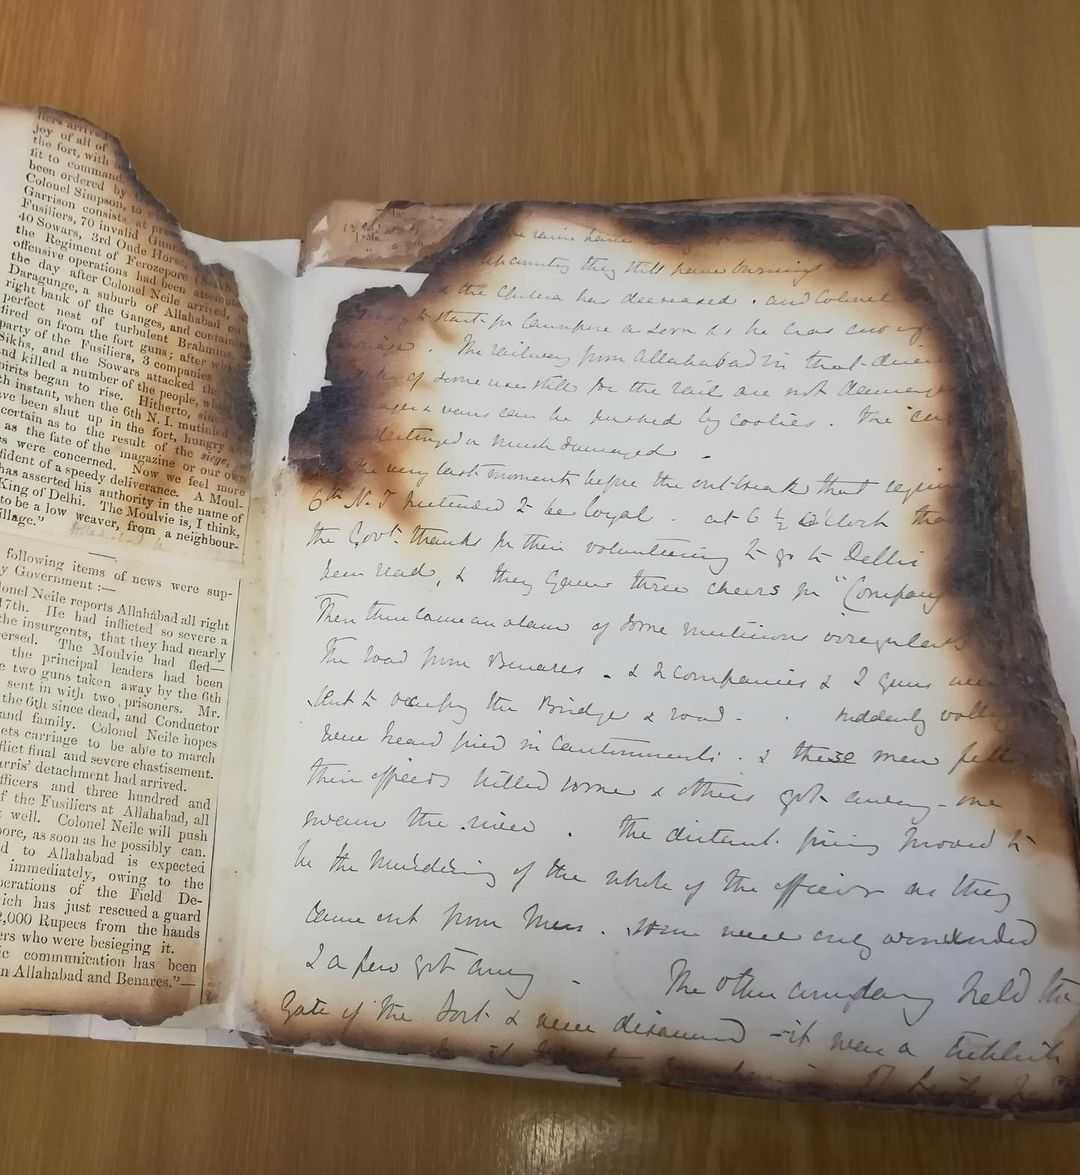 The singed pages of Lady Charlotte Canning's diary that were recovered post the fire